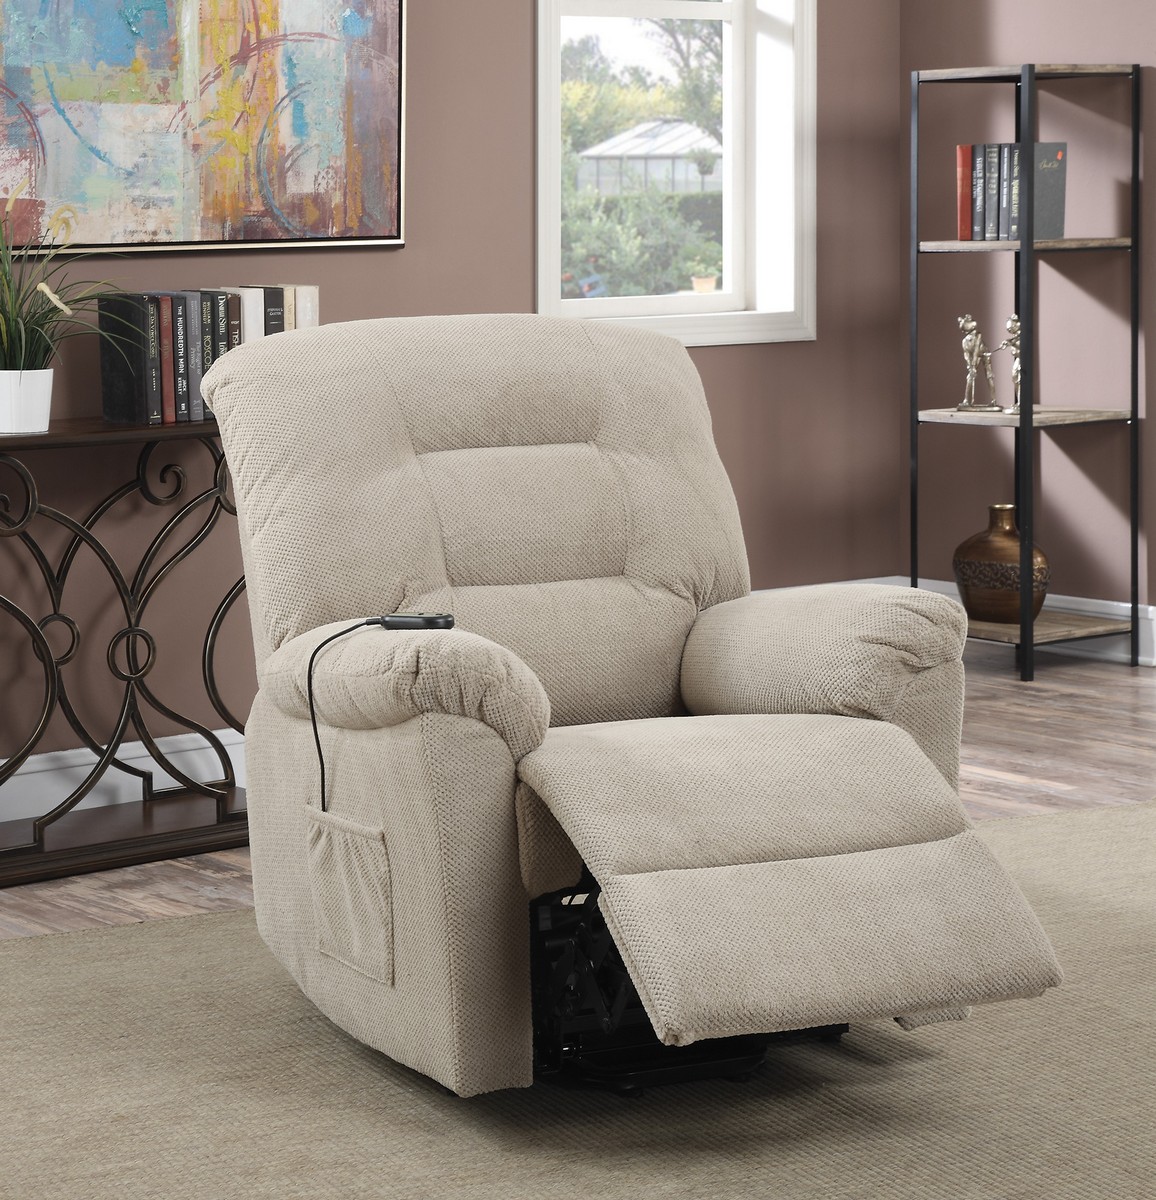 Coaster 600399 Power Lift Recliner - Taupe